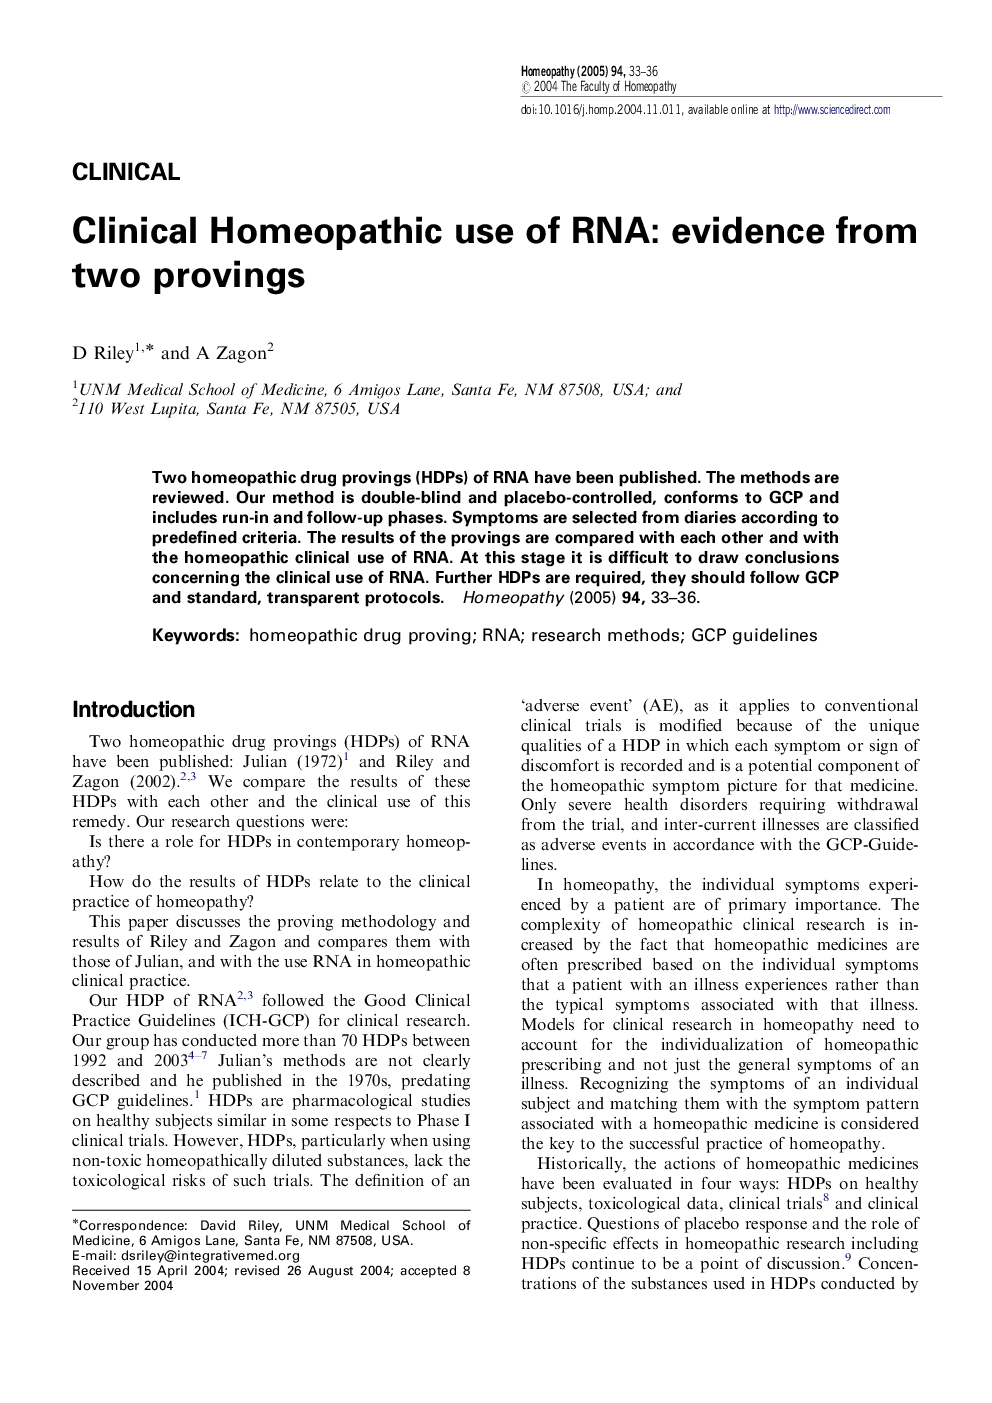 Clinical Homeopathic use of RNA: evidence from two provings